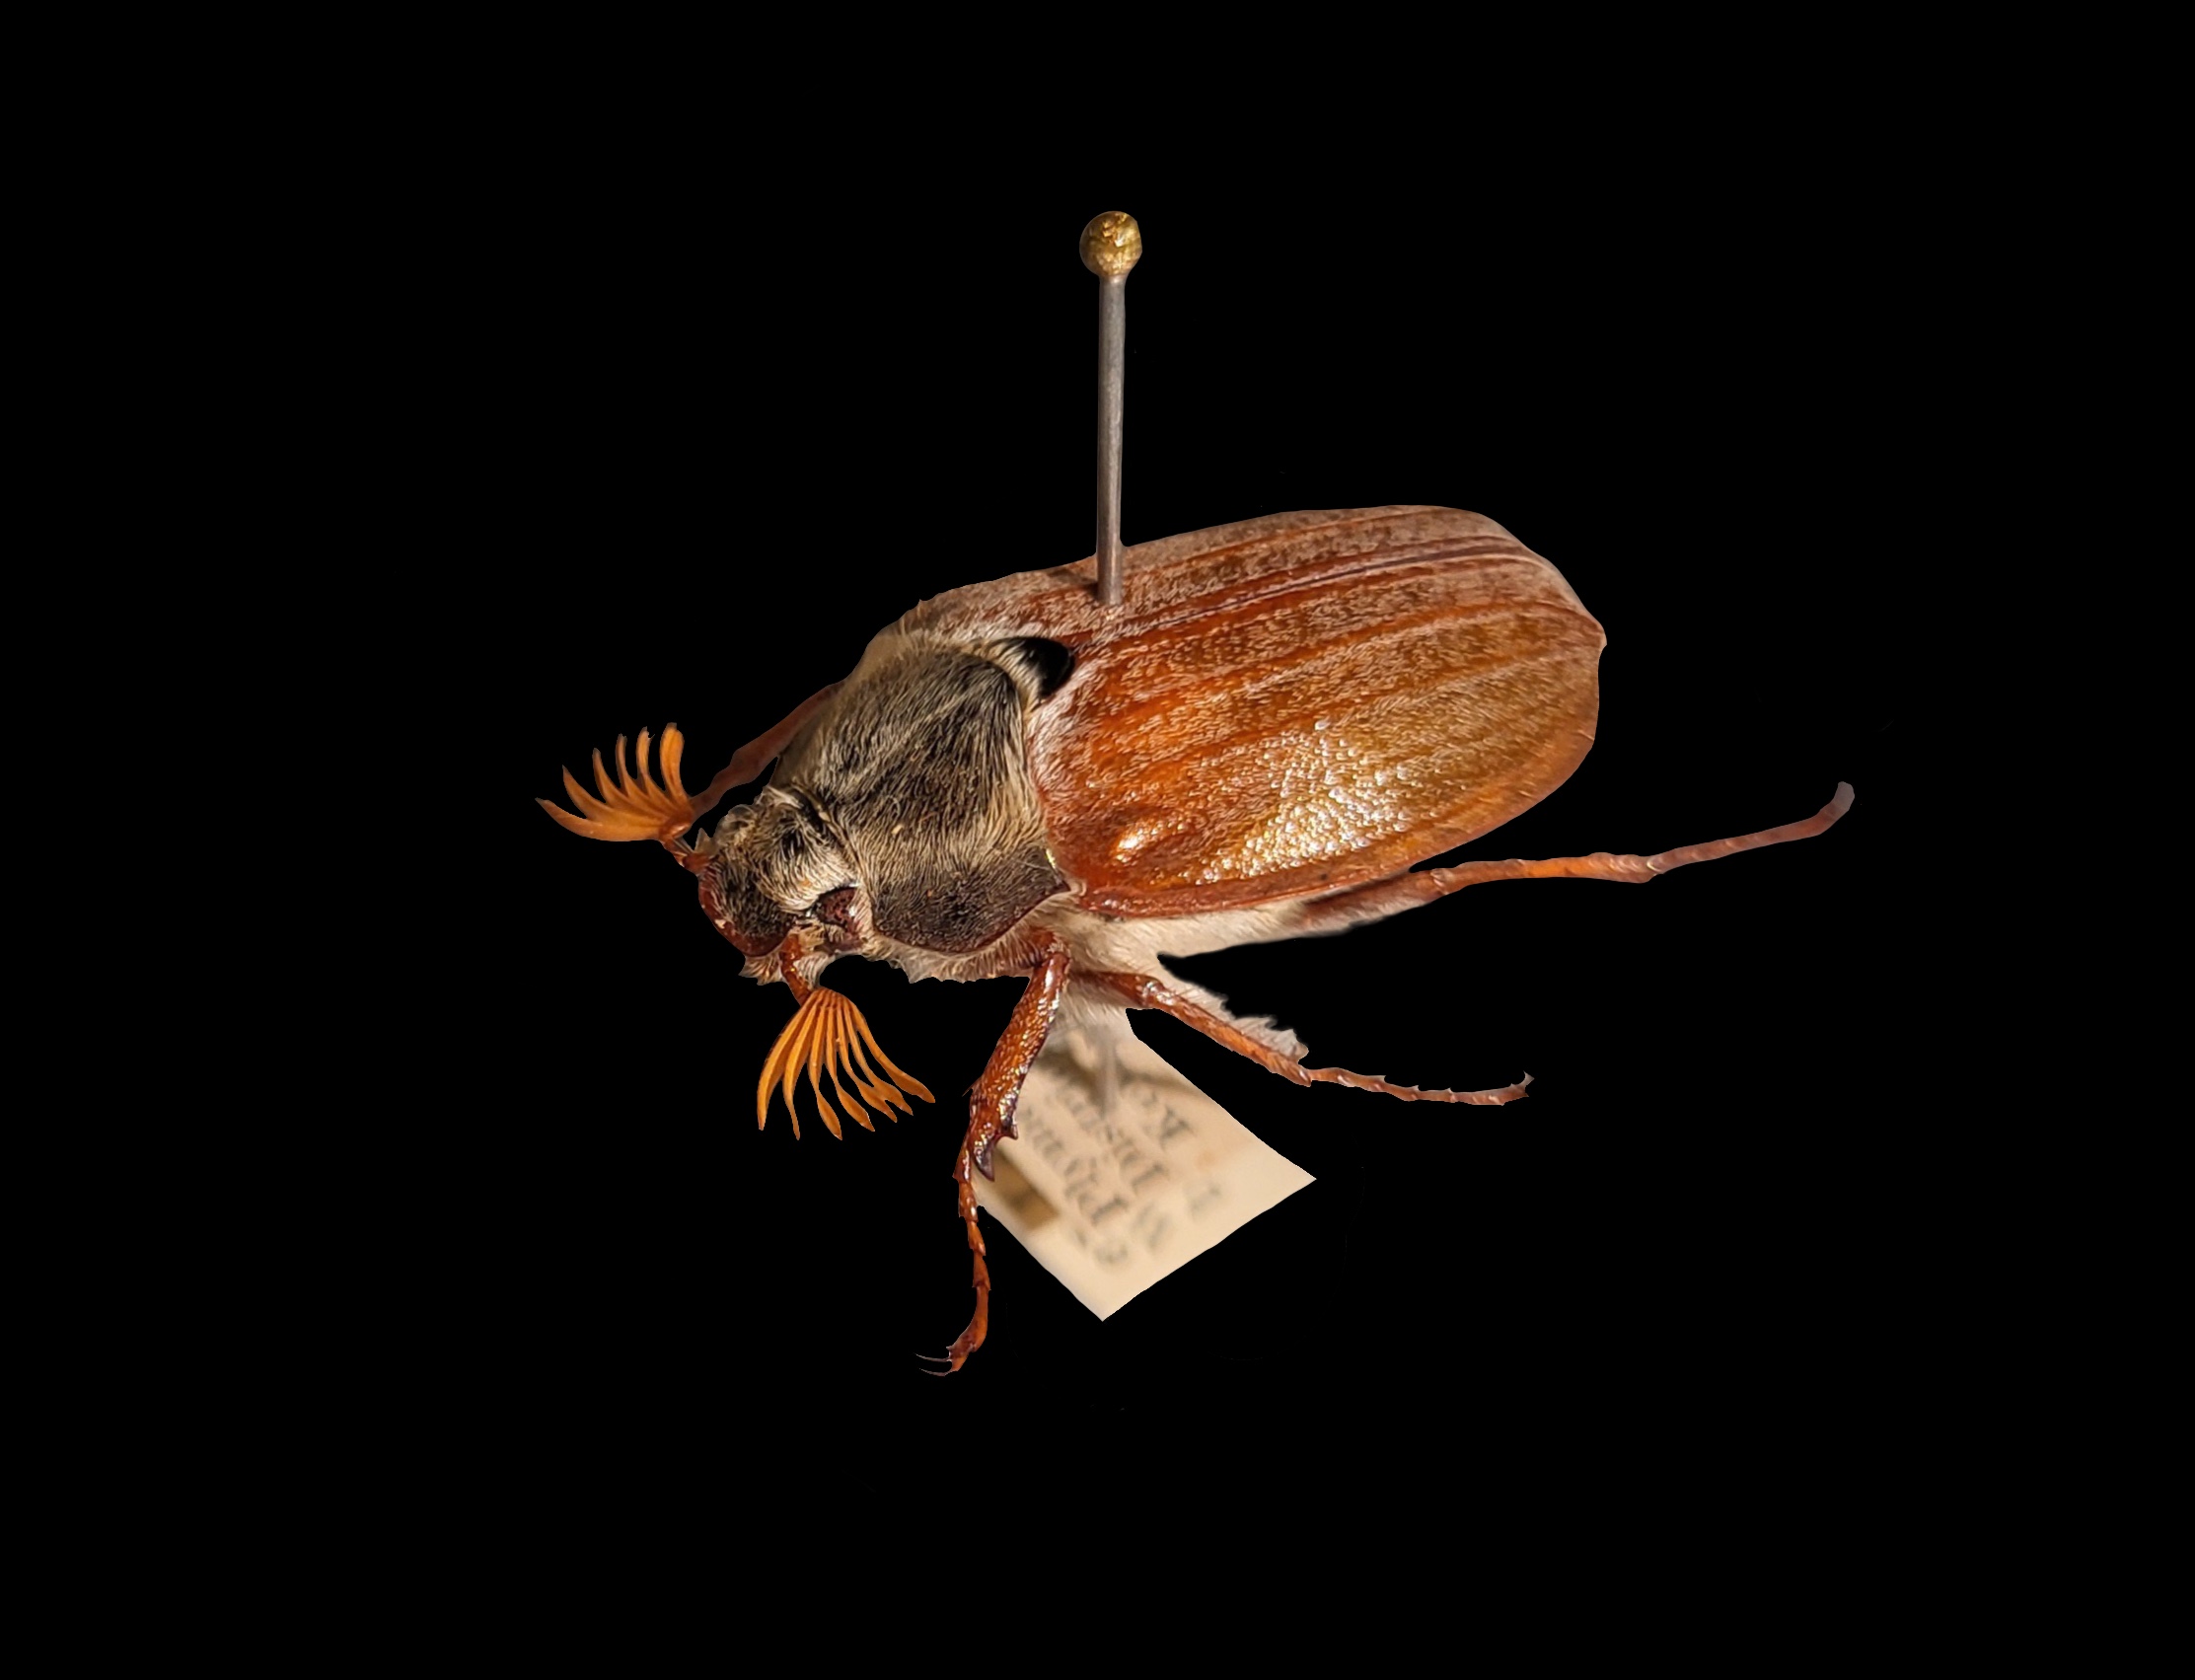 A pinned cockchafer beetle